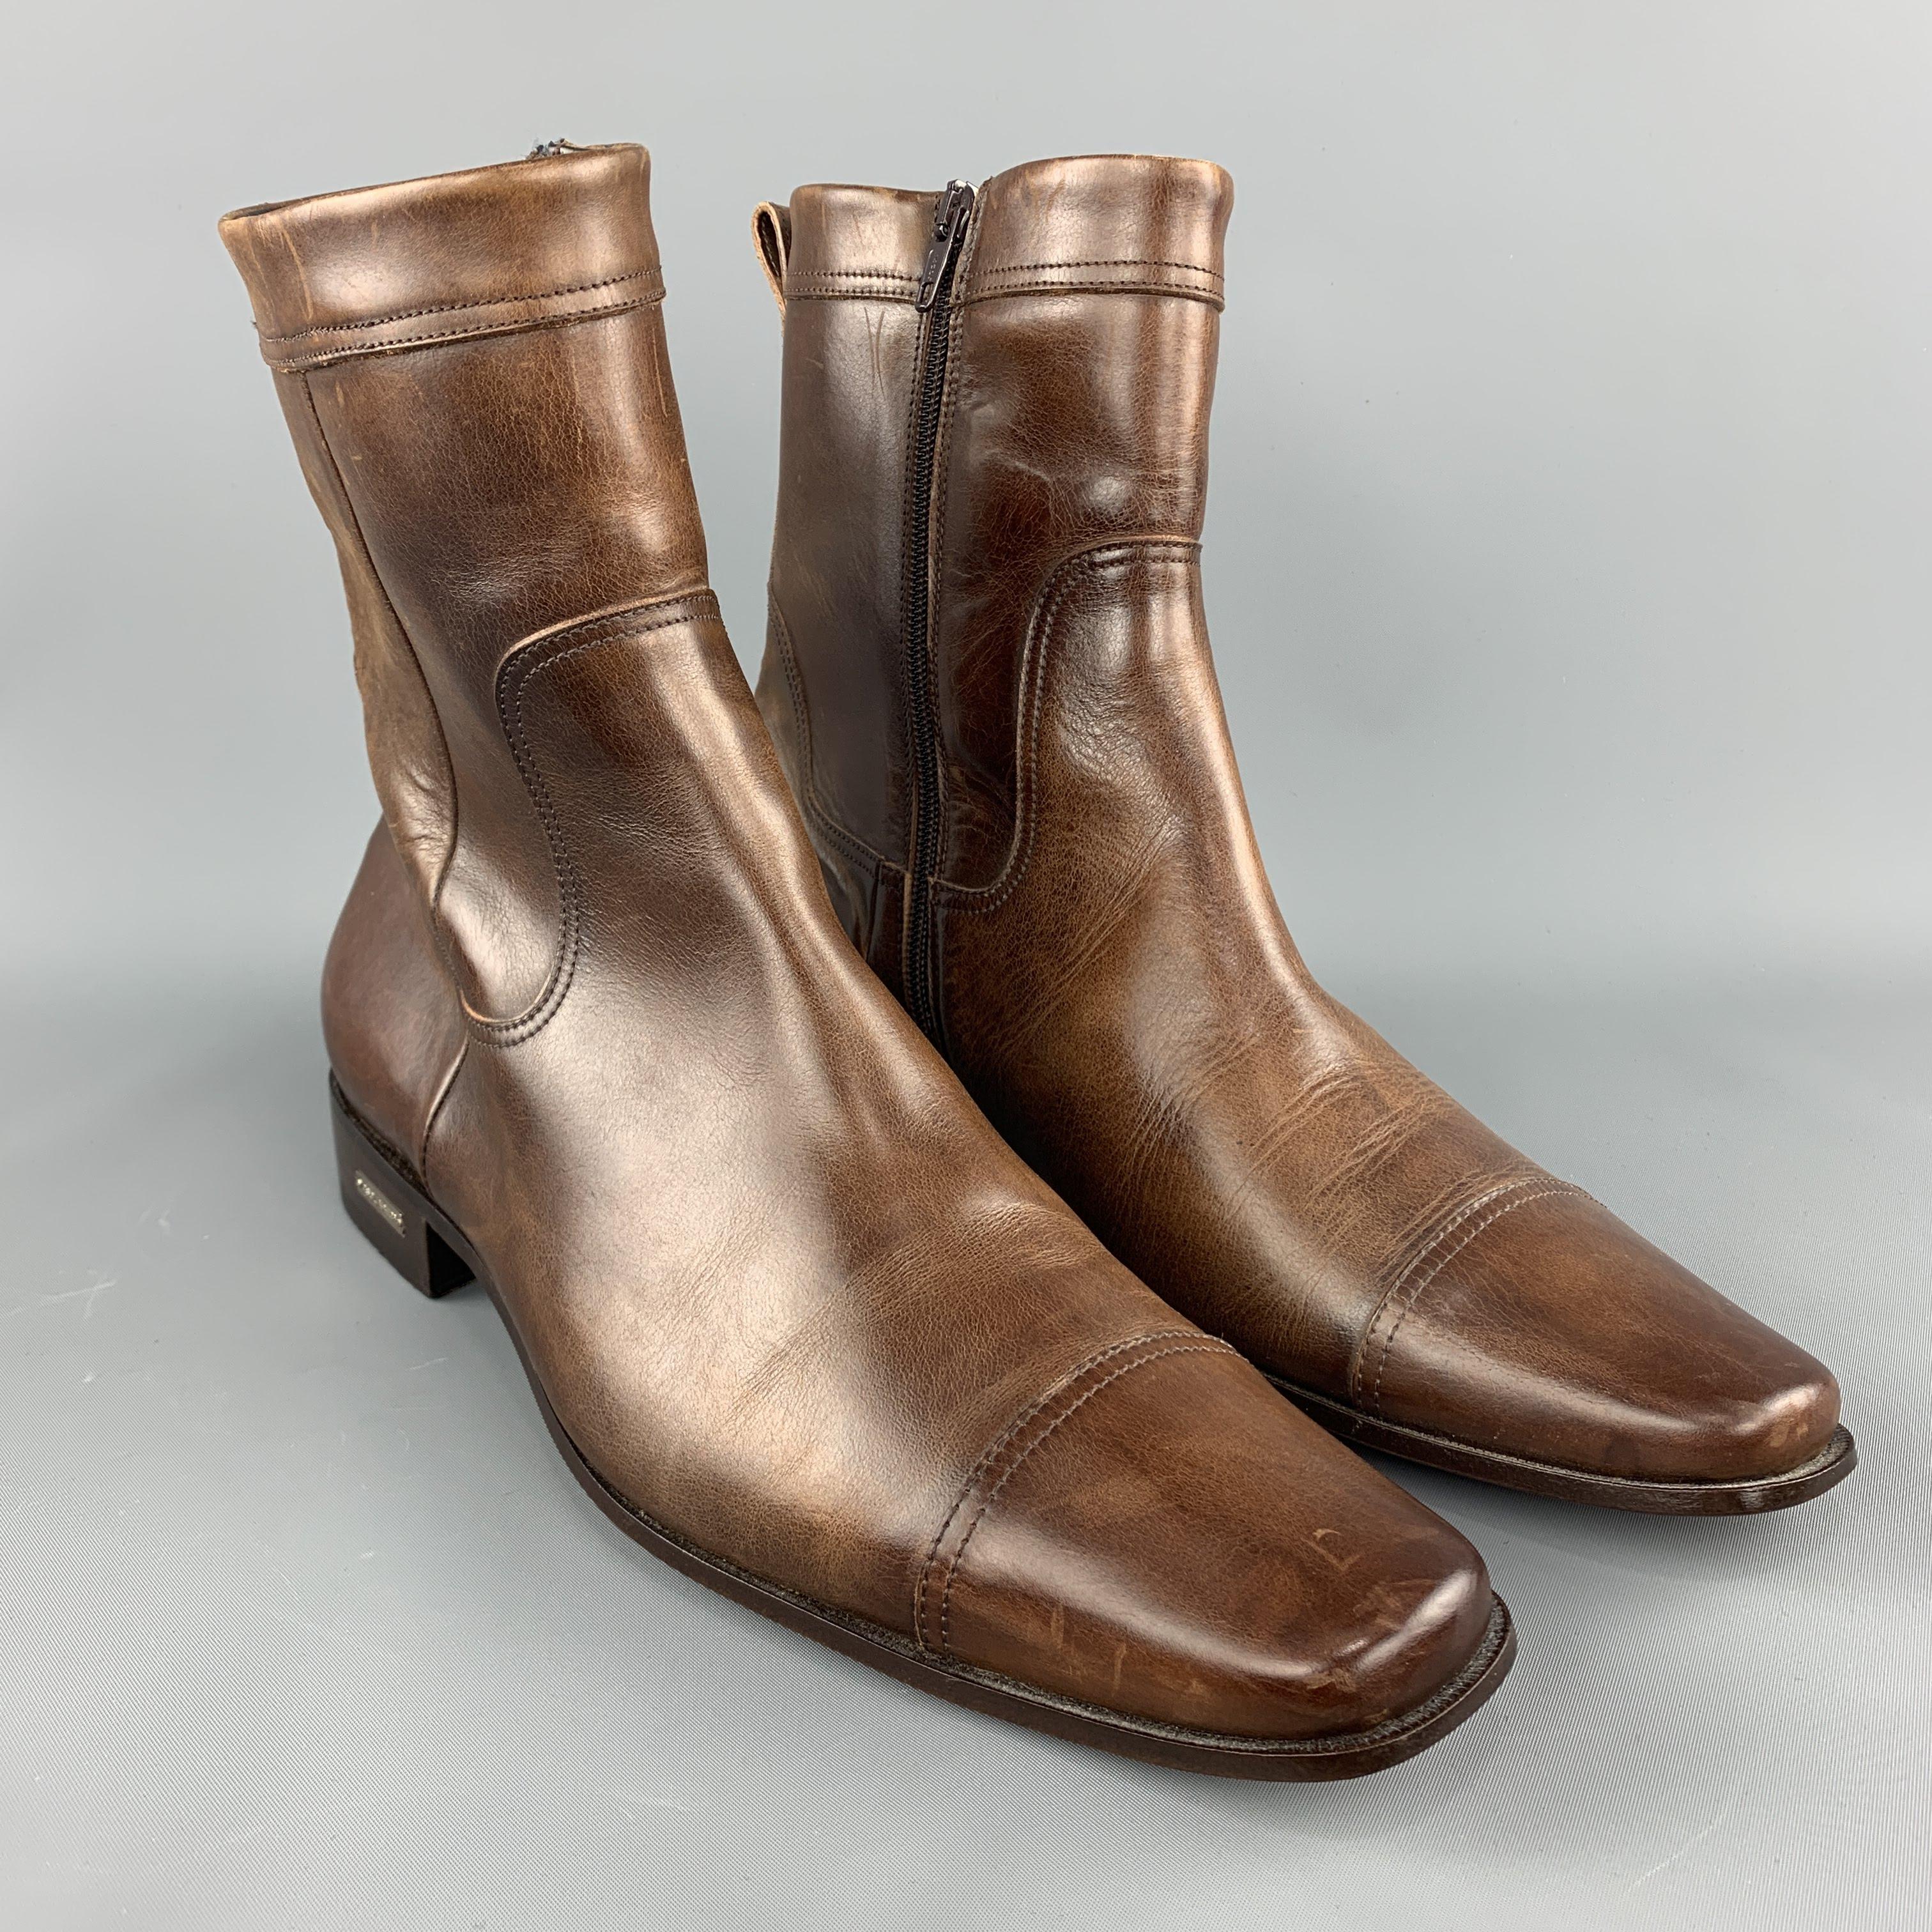 DSQUARED2 dress boots come in antique effect leather with with a cap toe, metal logo detailed heel, and inner zip. Made in Italy.
 
Very Good Pre-Owned Condition.
Marked: IT 43.5
 
Outsole: 12.5 x 4 in.
Length: 8.75 in.